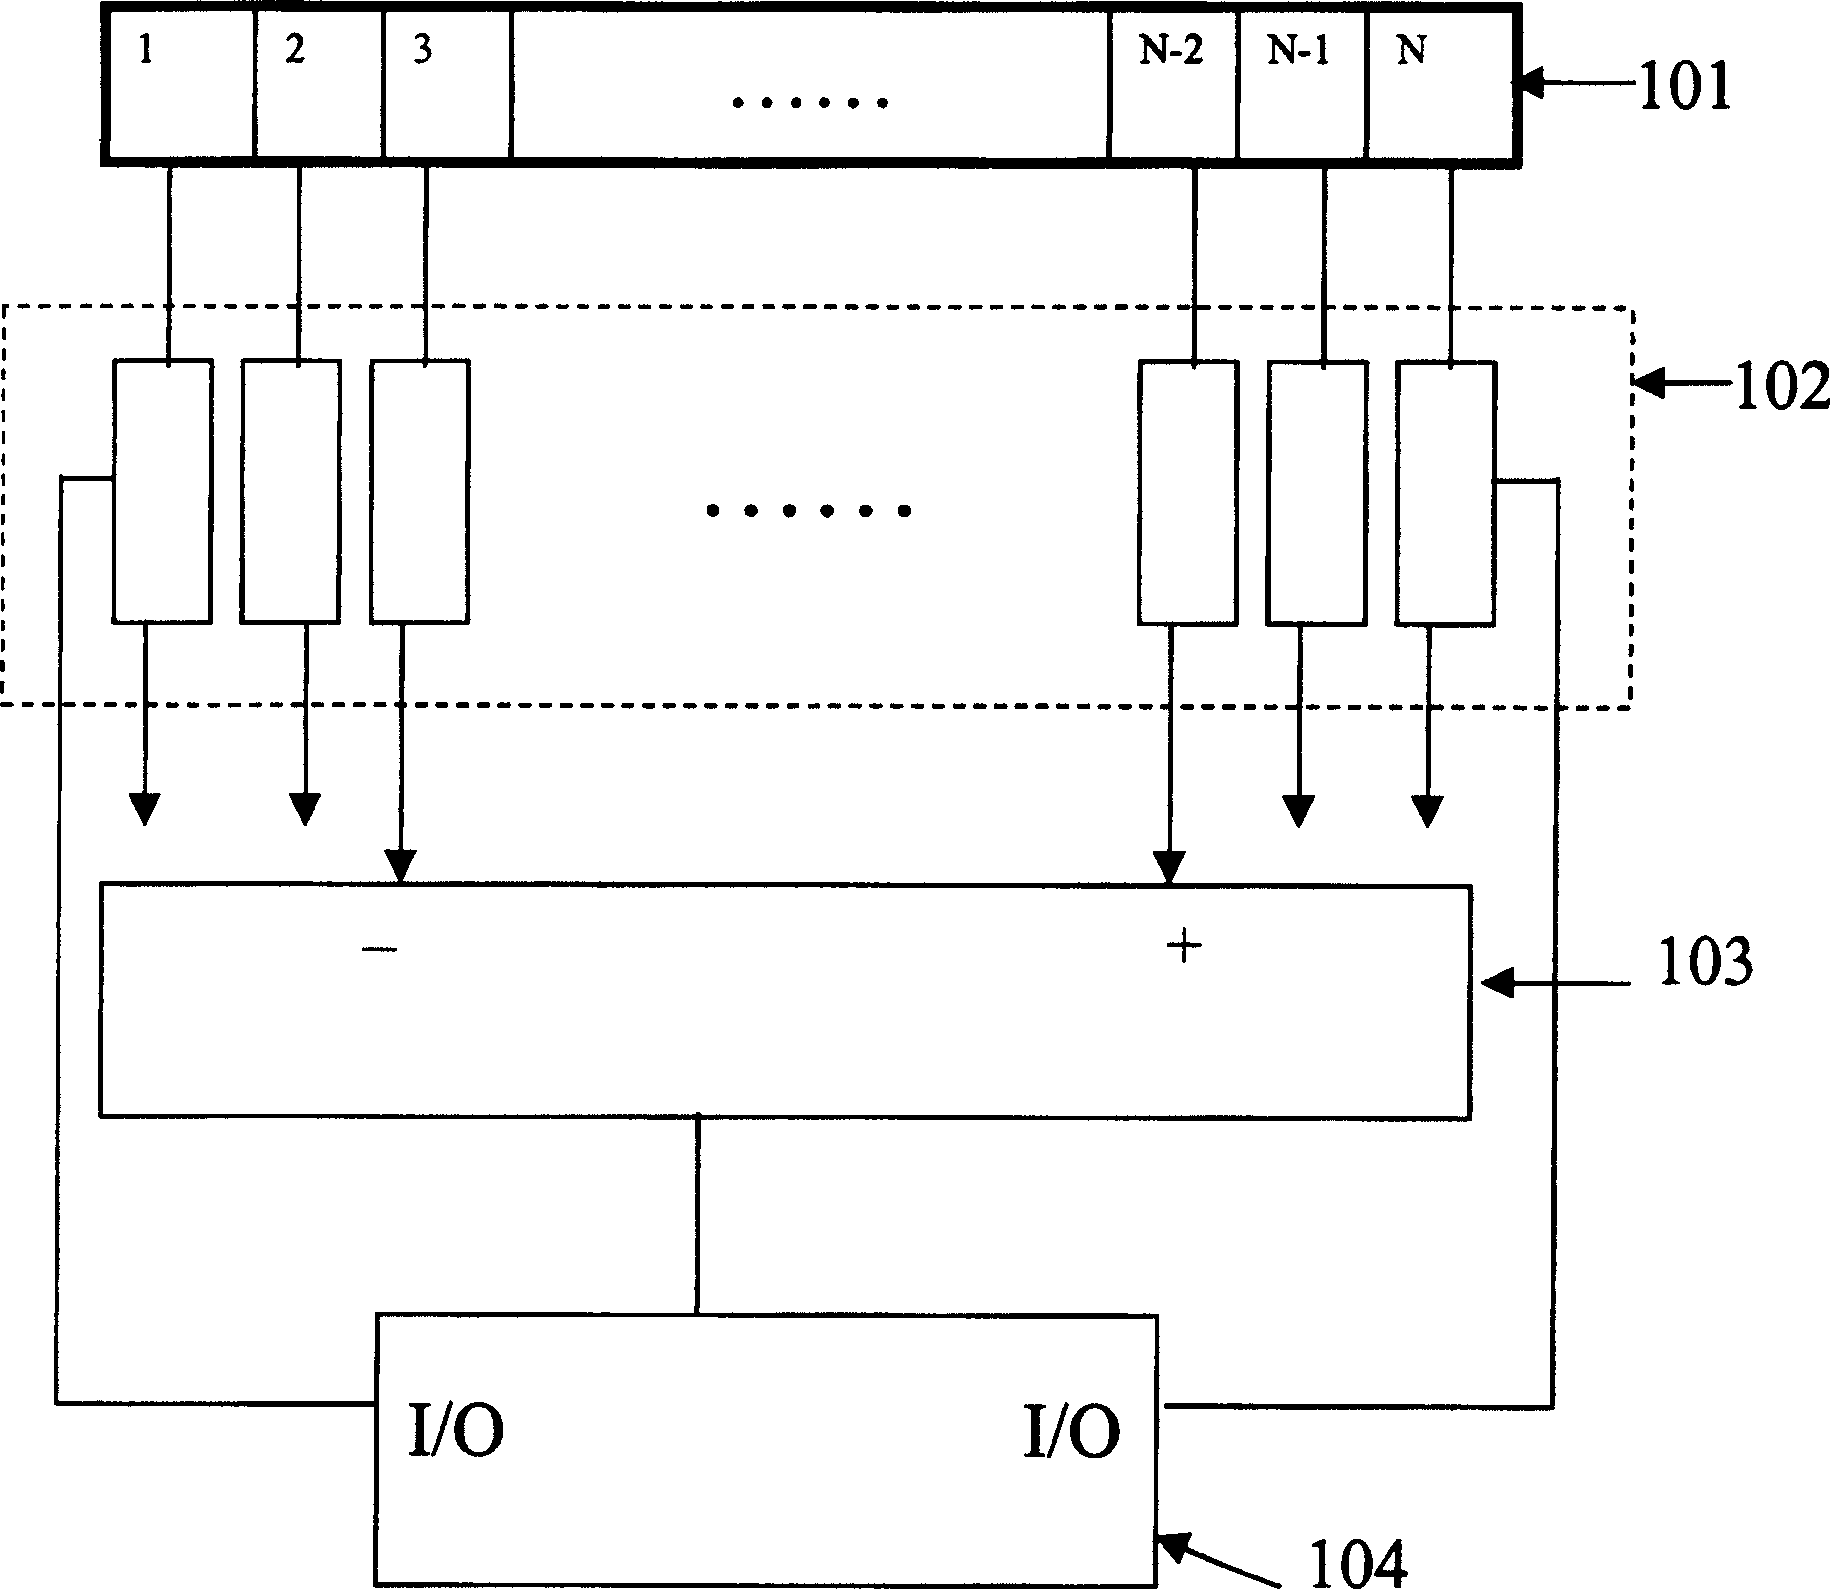 Safety and precise fuel cell voltage monitoring apparatus